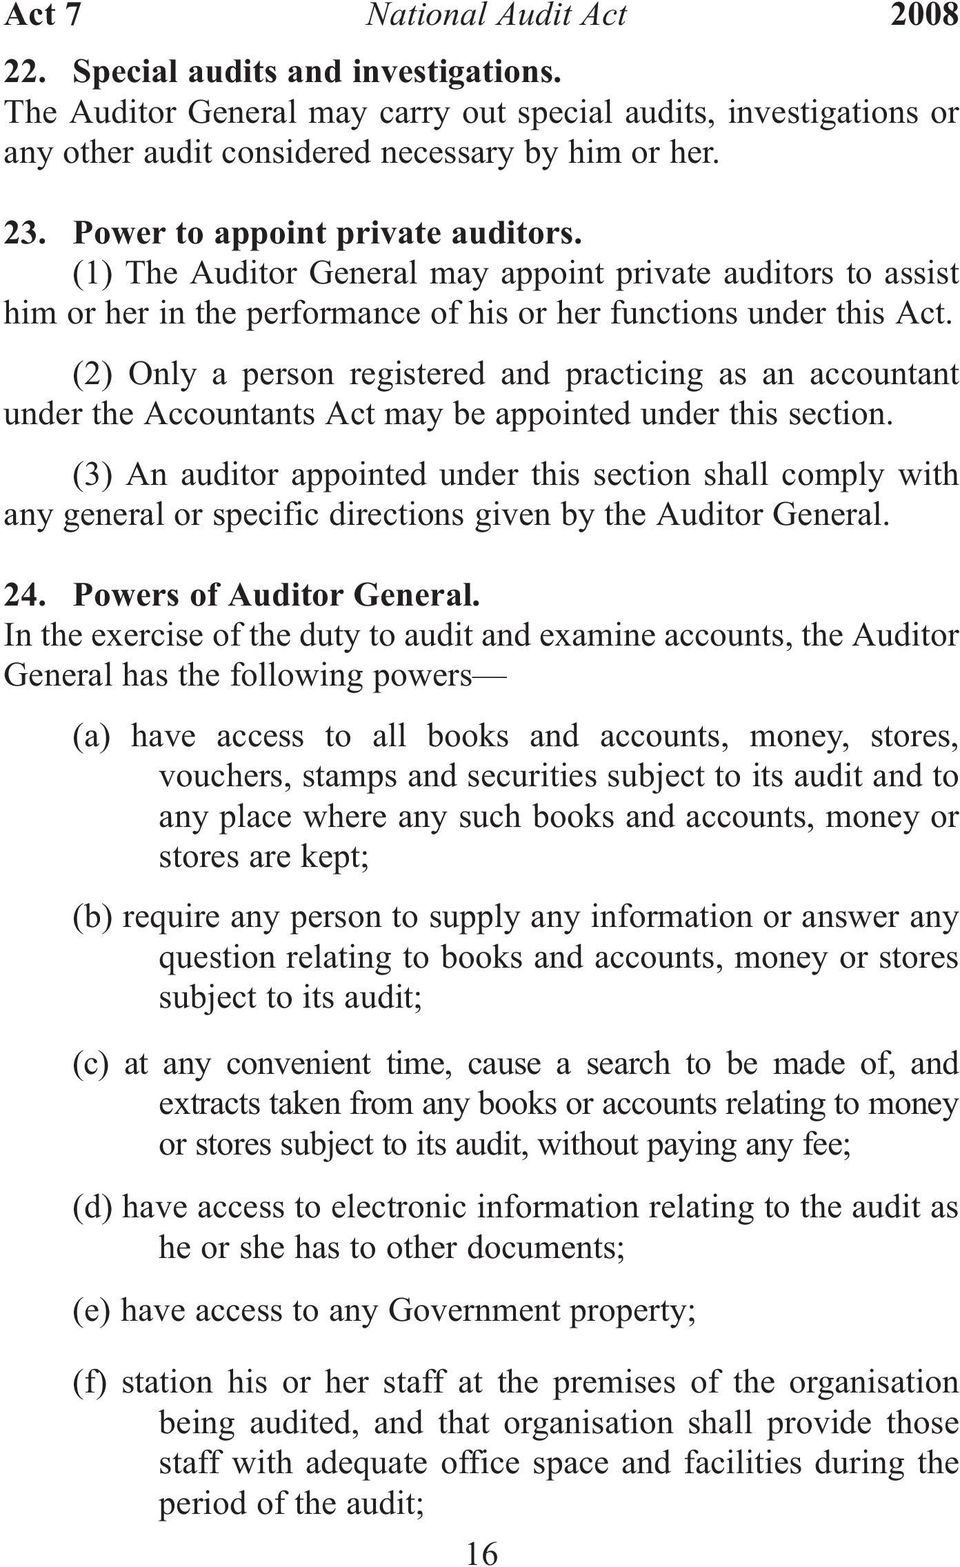 (2) Only a person registered and practicing as an accountant under the Accountants Act may be appointed under this section.